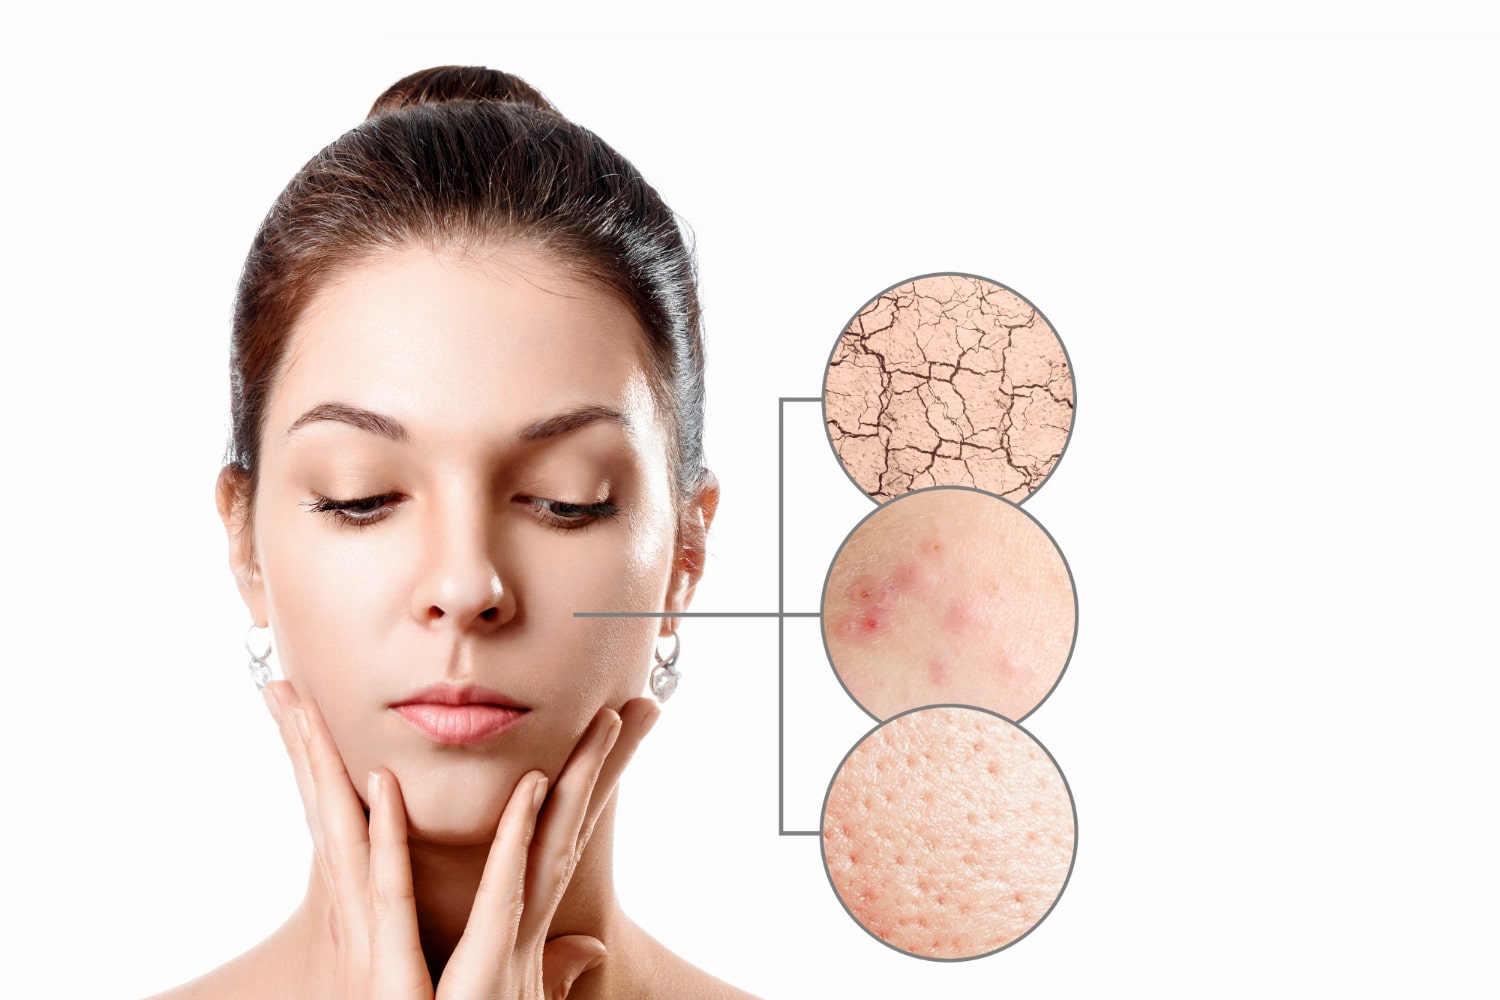 Healthy skin rejuvenation and dermatological benefits of iCCS treatment.